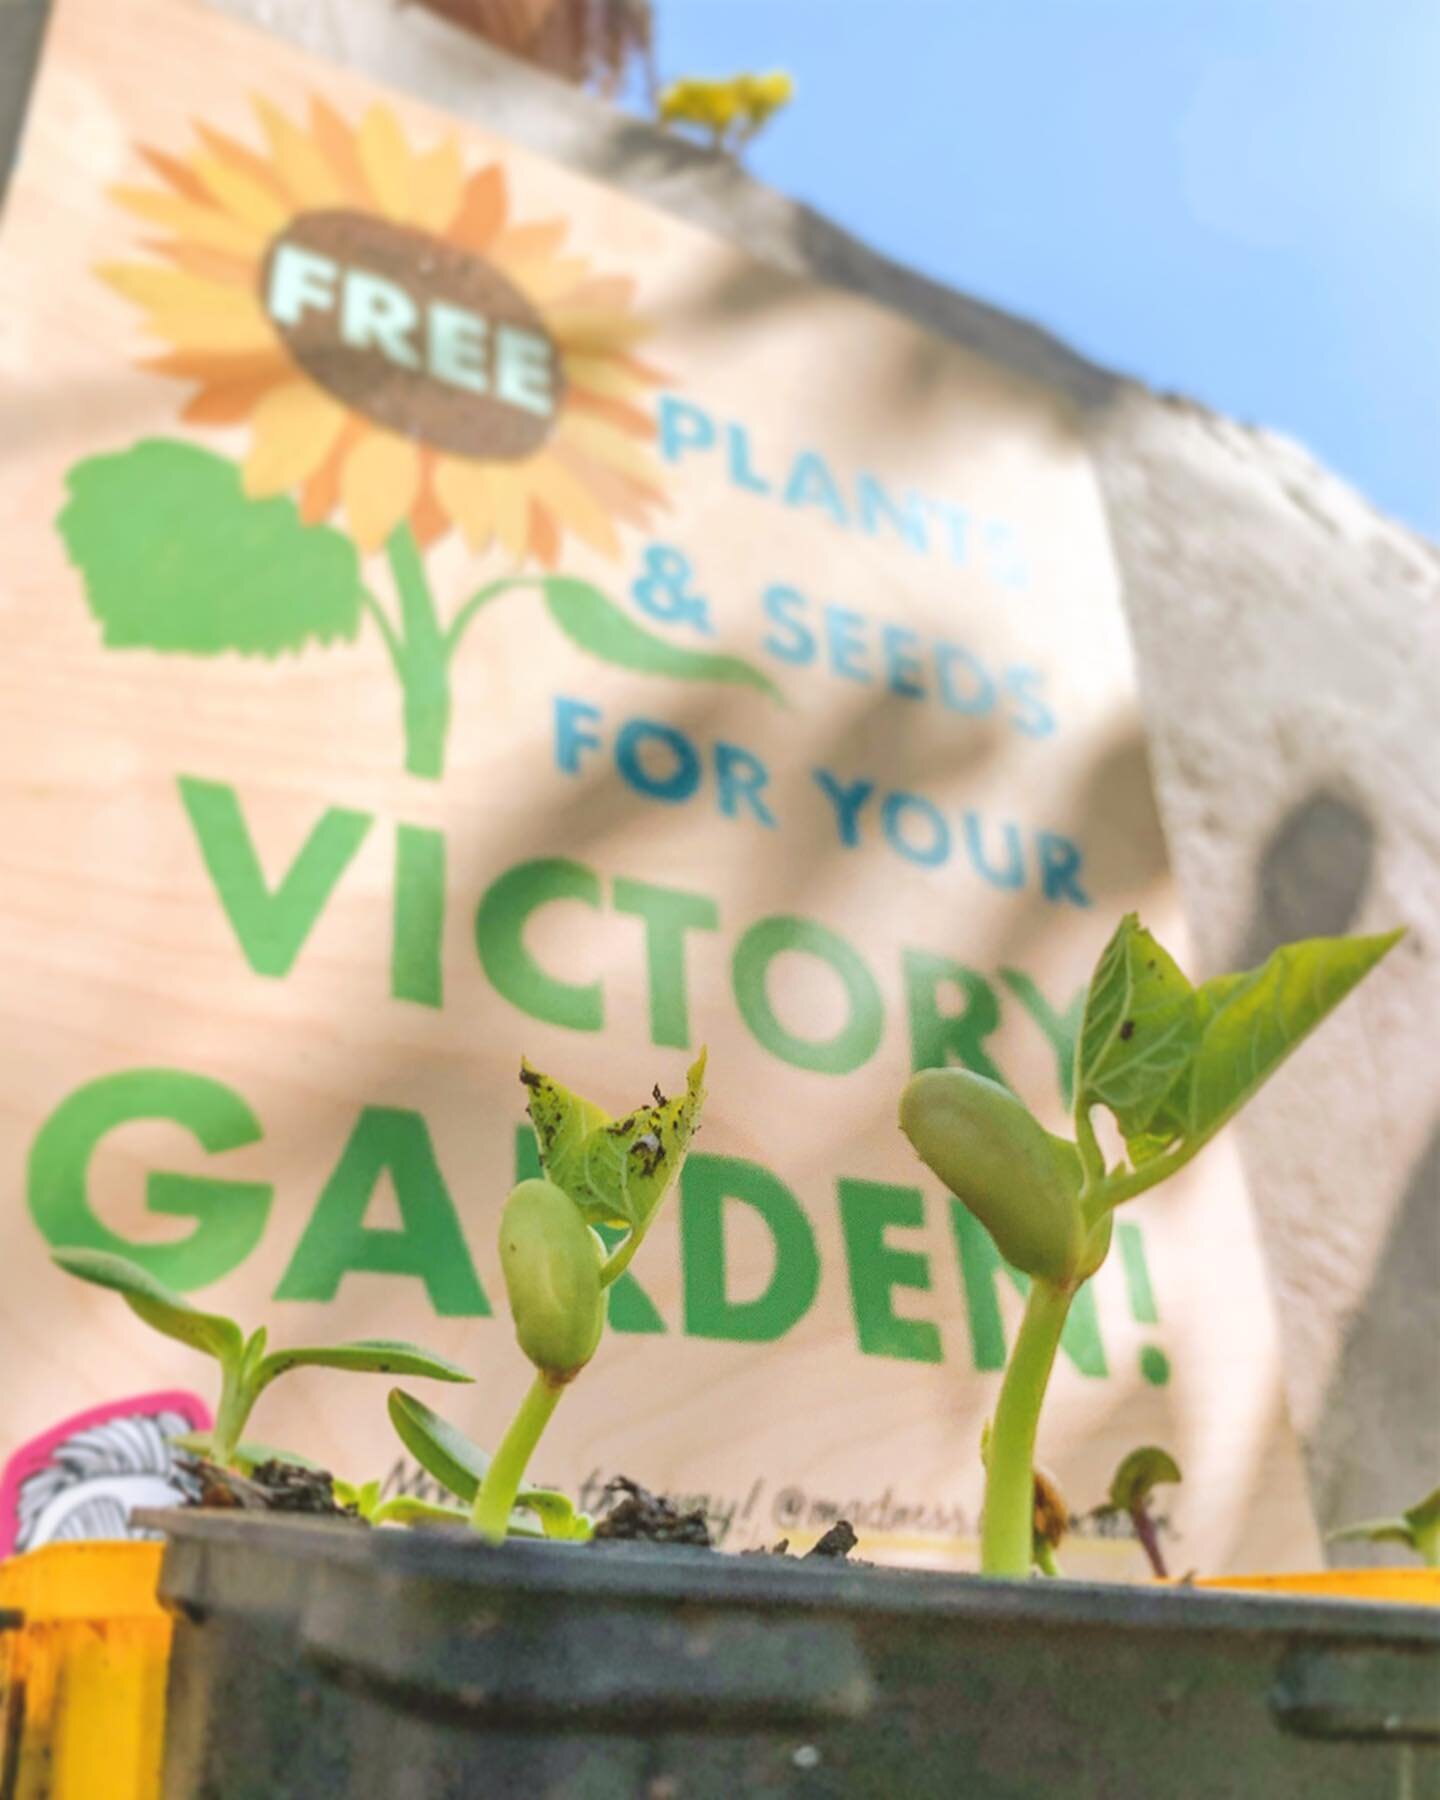 🌱💛 Free Plants and Seeds for your Victory Garden&mdash;available now in the Old Fourth Ward! Get your XXL sunflowers and your &ldquo;rattlesnake&rdquo; pole beans while they last! 🌻🌻🌻 .
.
I&rsquo;ve been grateful for this extra time in my own ga